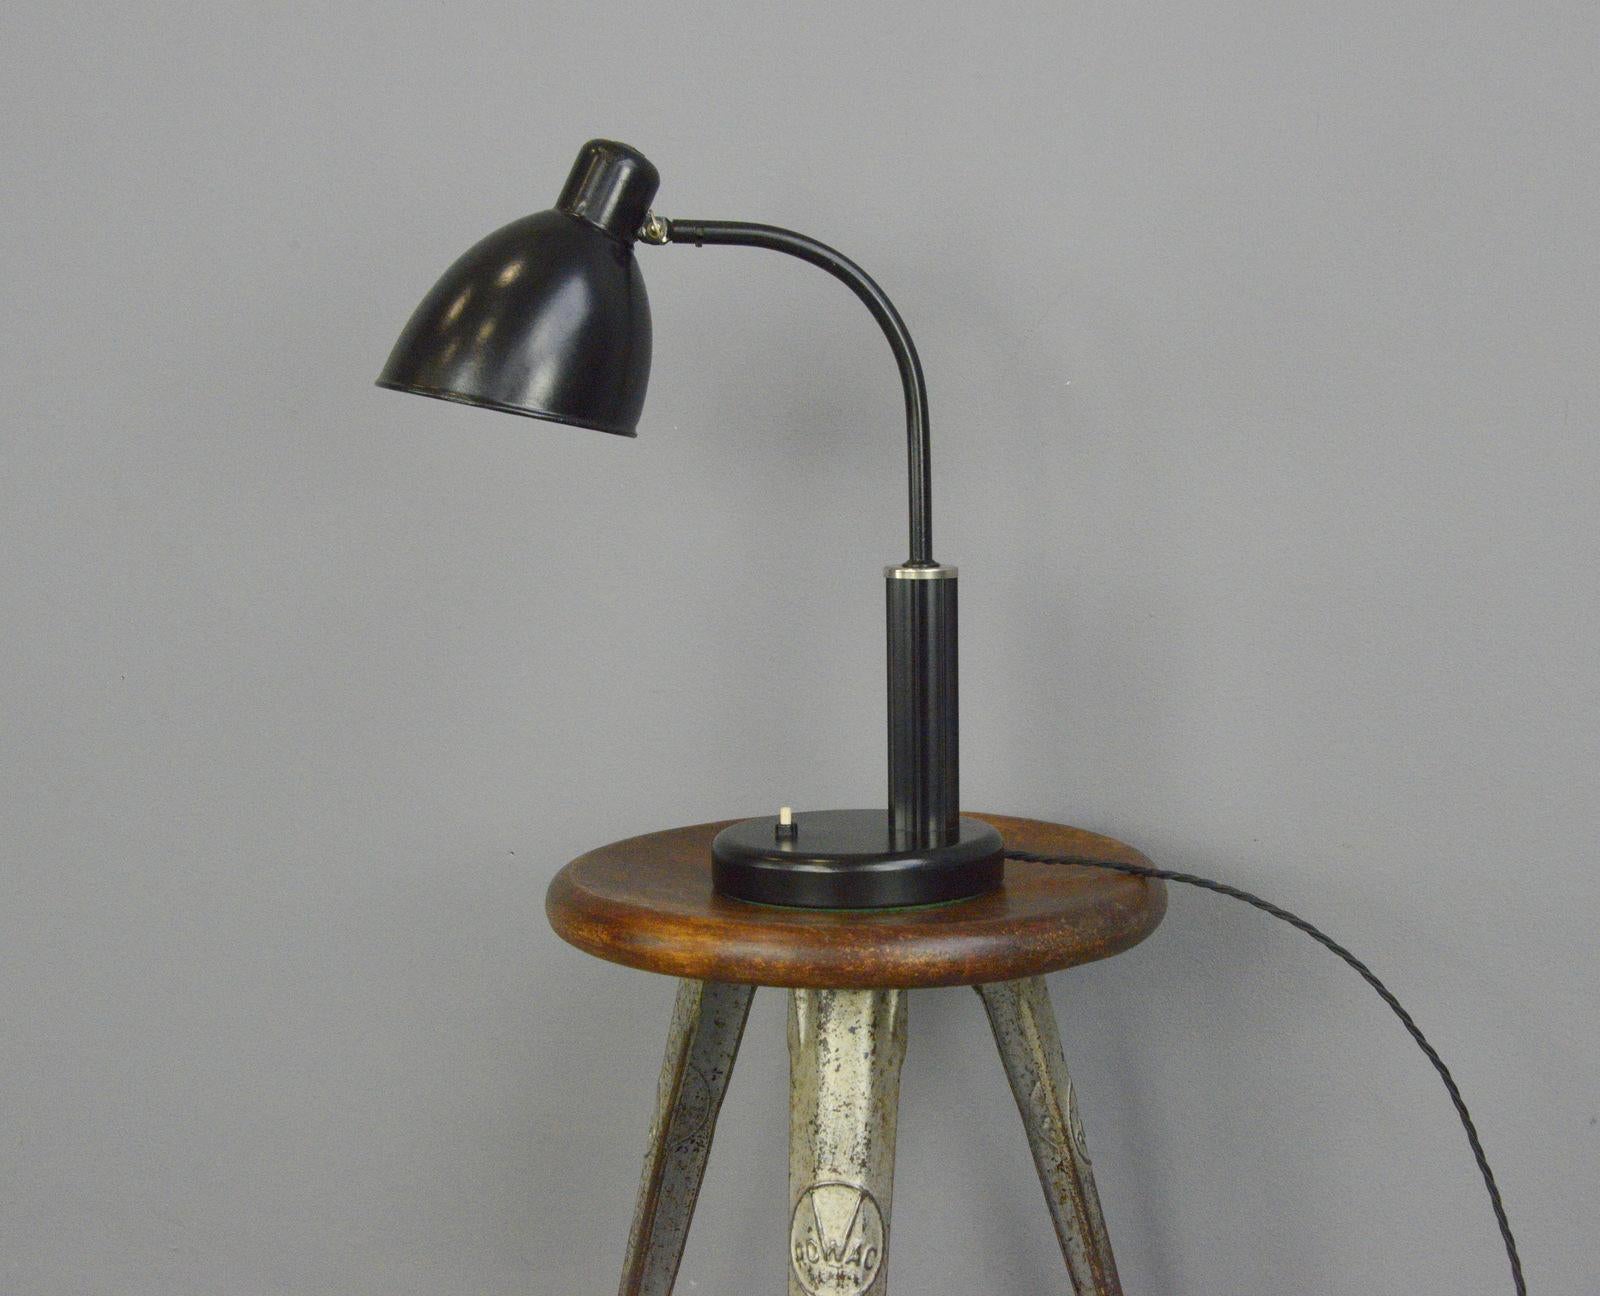 Bauhaus desk lamp by Molitor circa 1930s

- Steel shade and arm
- Bakelite handle
- On/Off switch on the base
- Concrete base
- Takes E27 fitting bulbs
- 